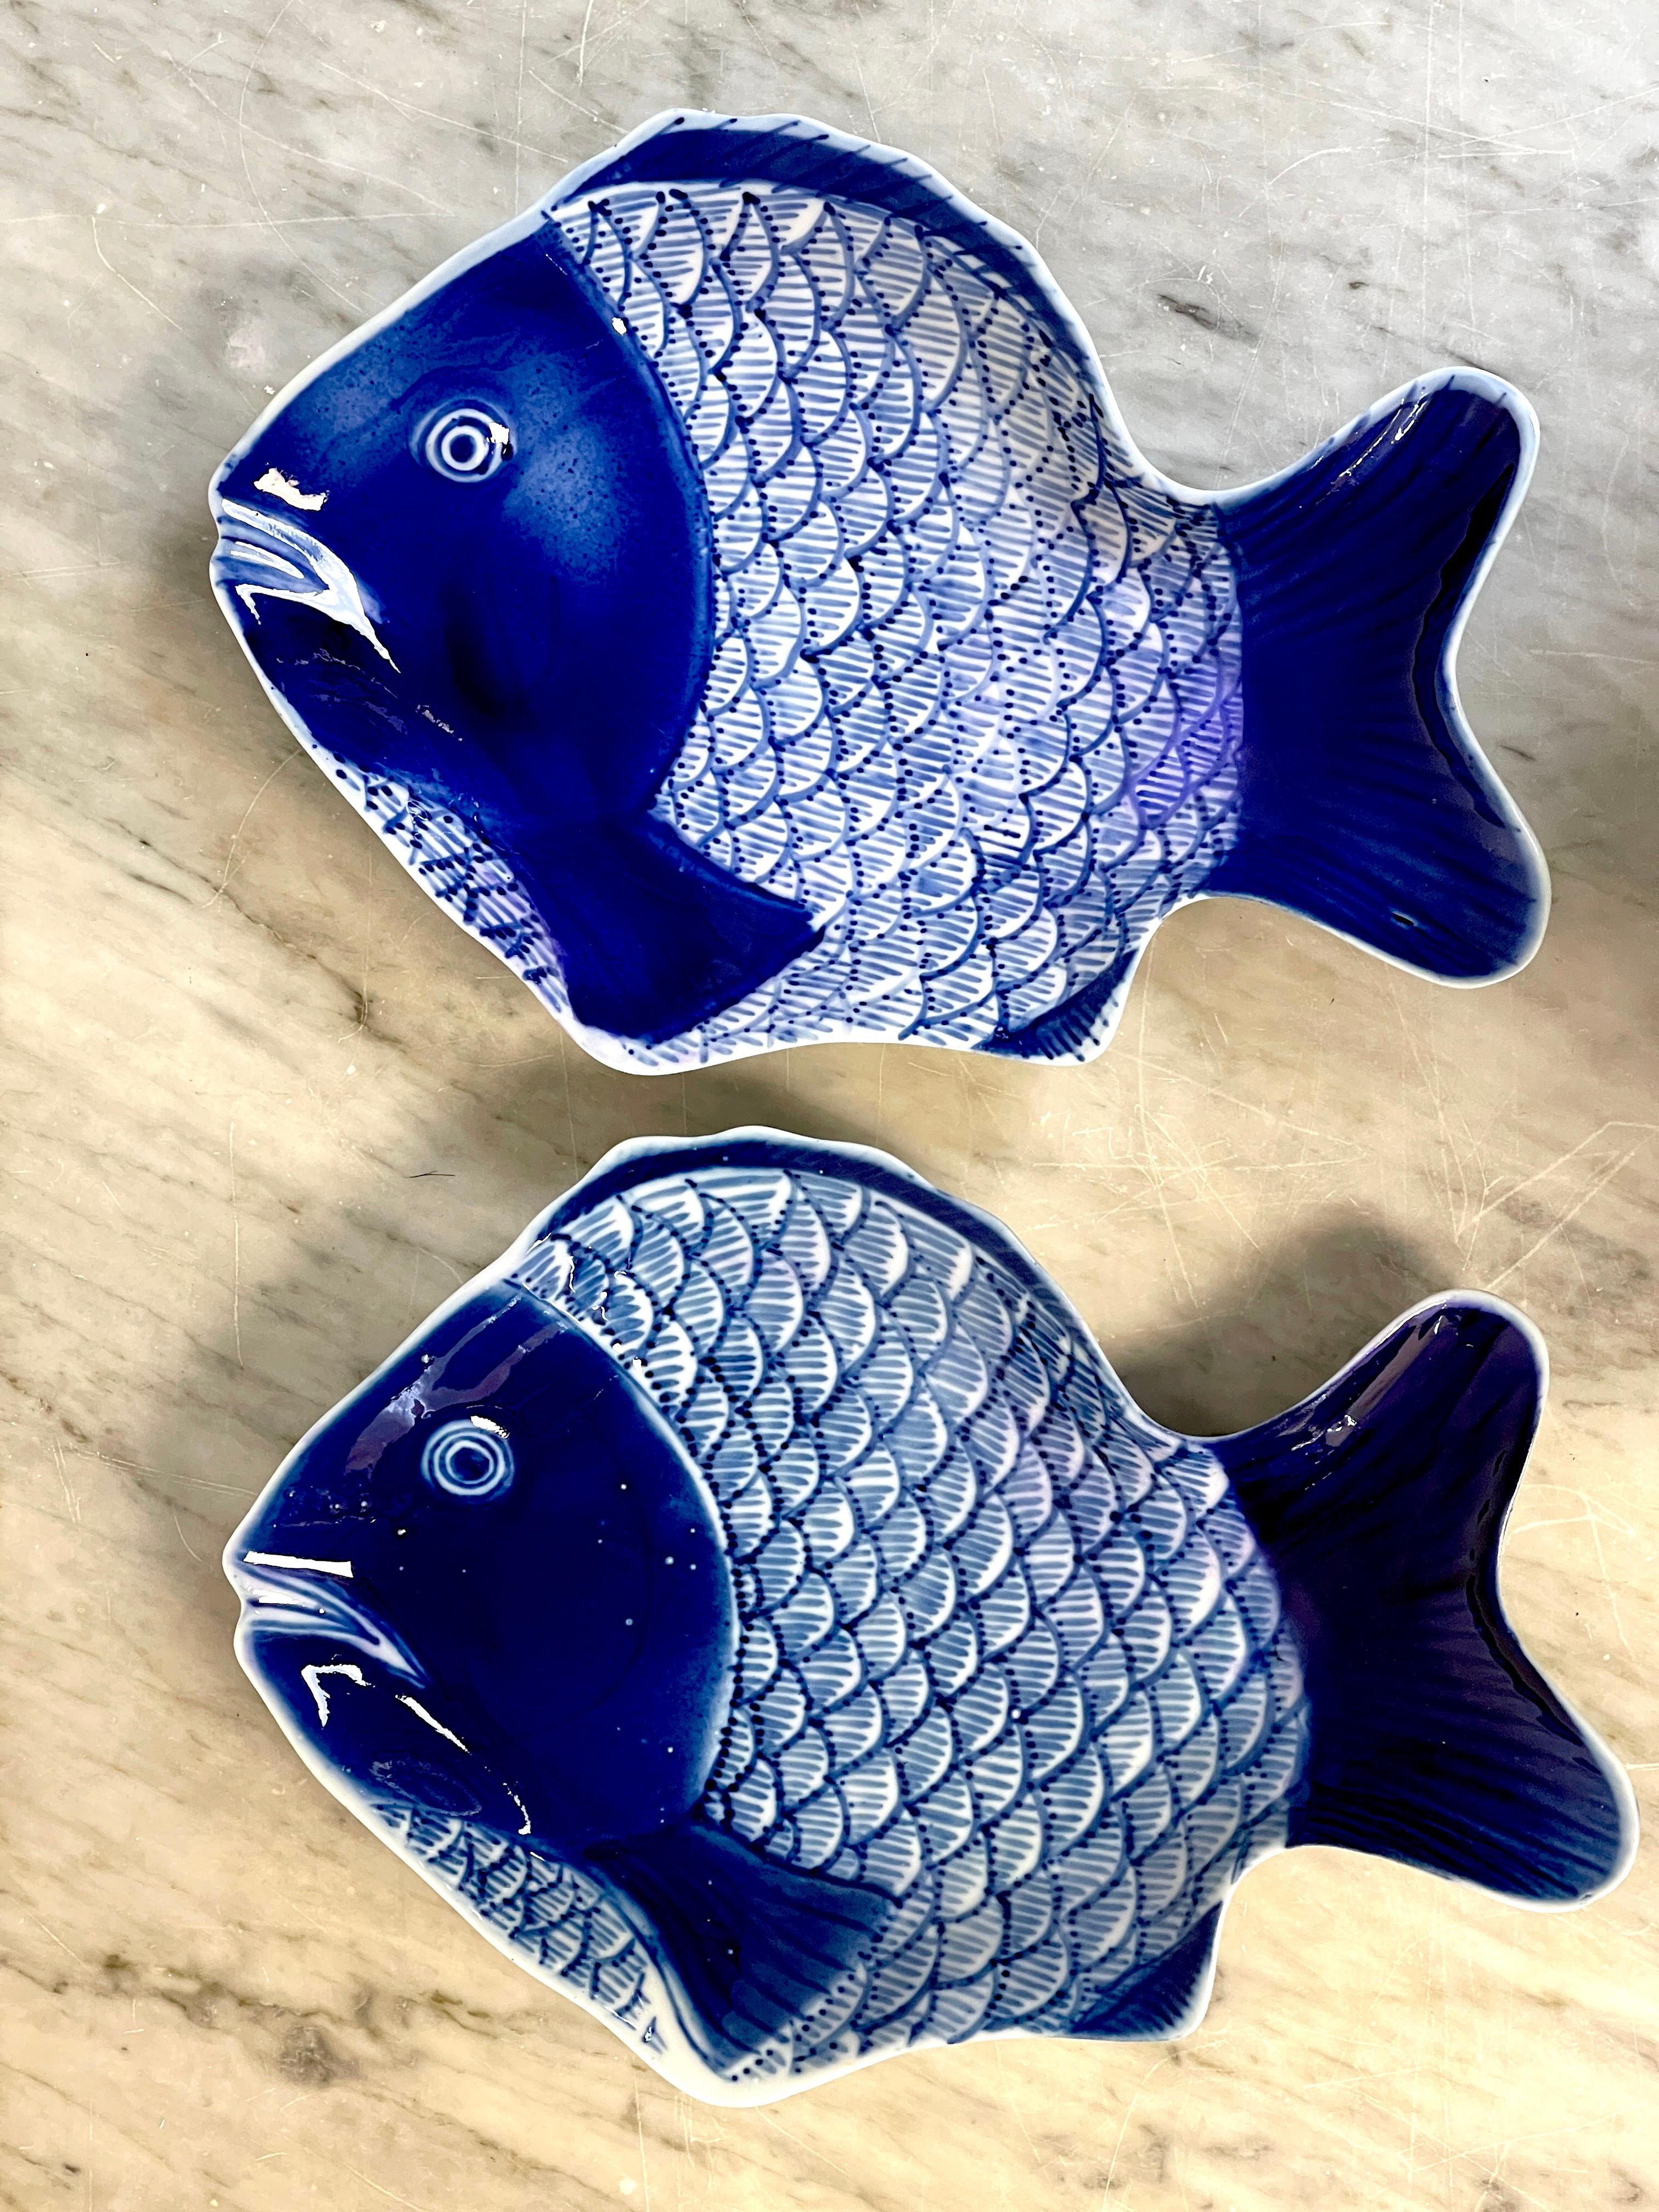 Meiji Period Fukagawa blue & white fish plates, 2 available 
Japan Circa 1900s
Offering two similar Fukagawa (Attributed) realistically decorated by hand-painting and cobalt blue enamel. With decorated backs, Unmarked. 
Sold individually. Please